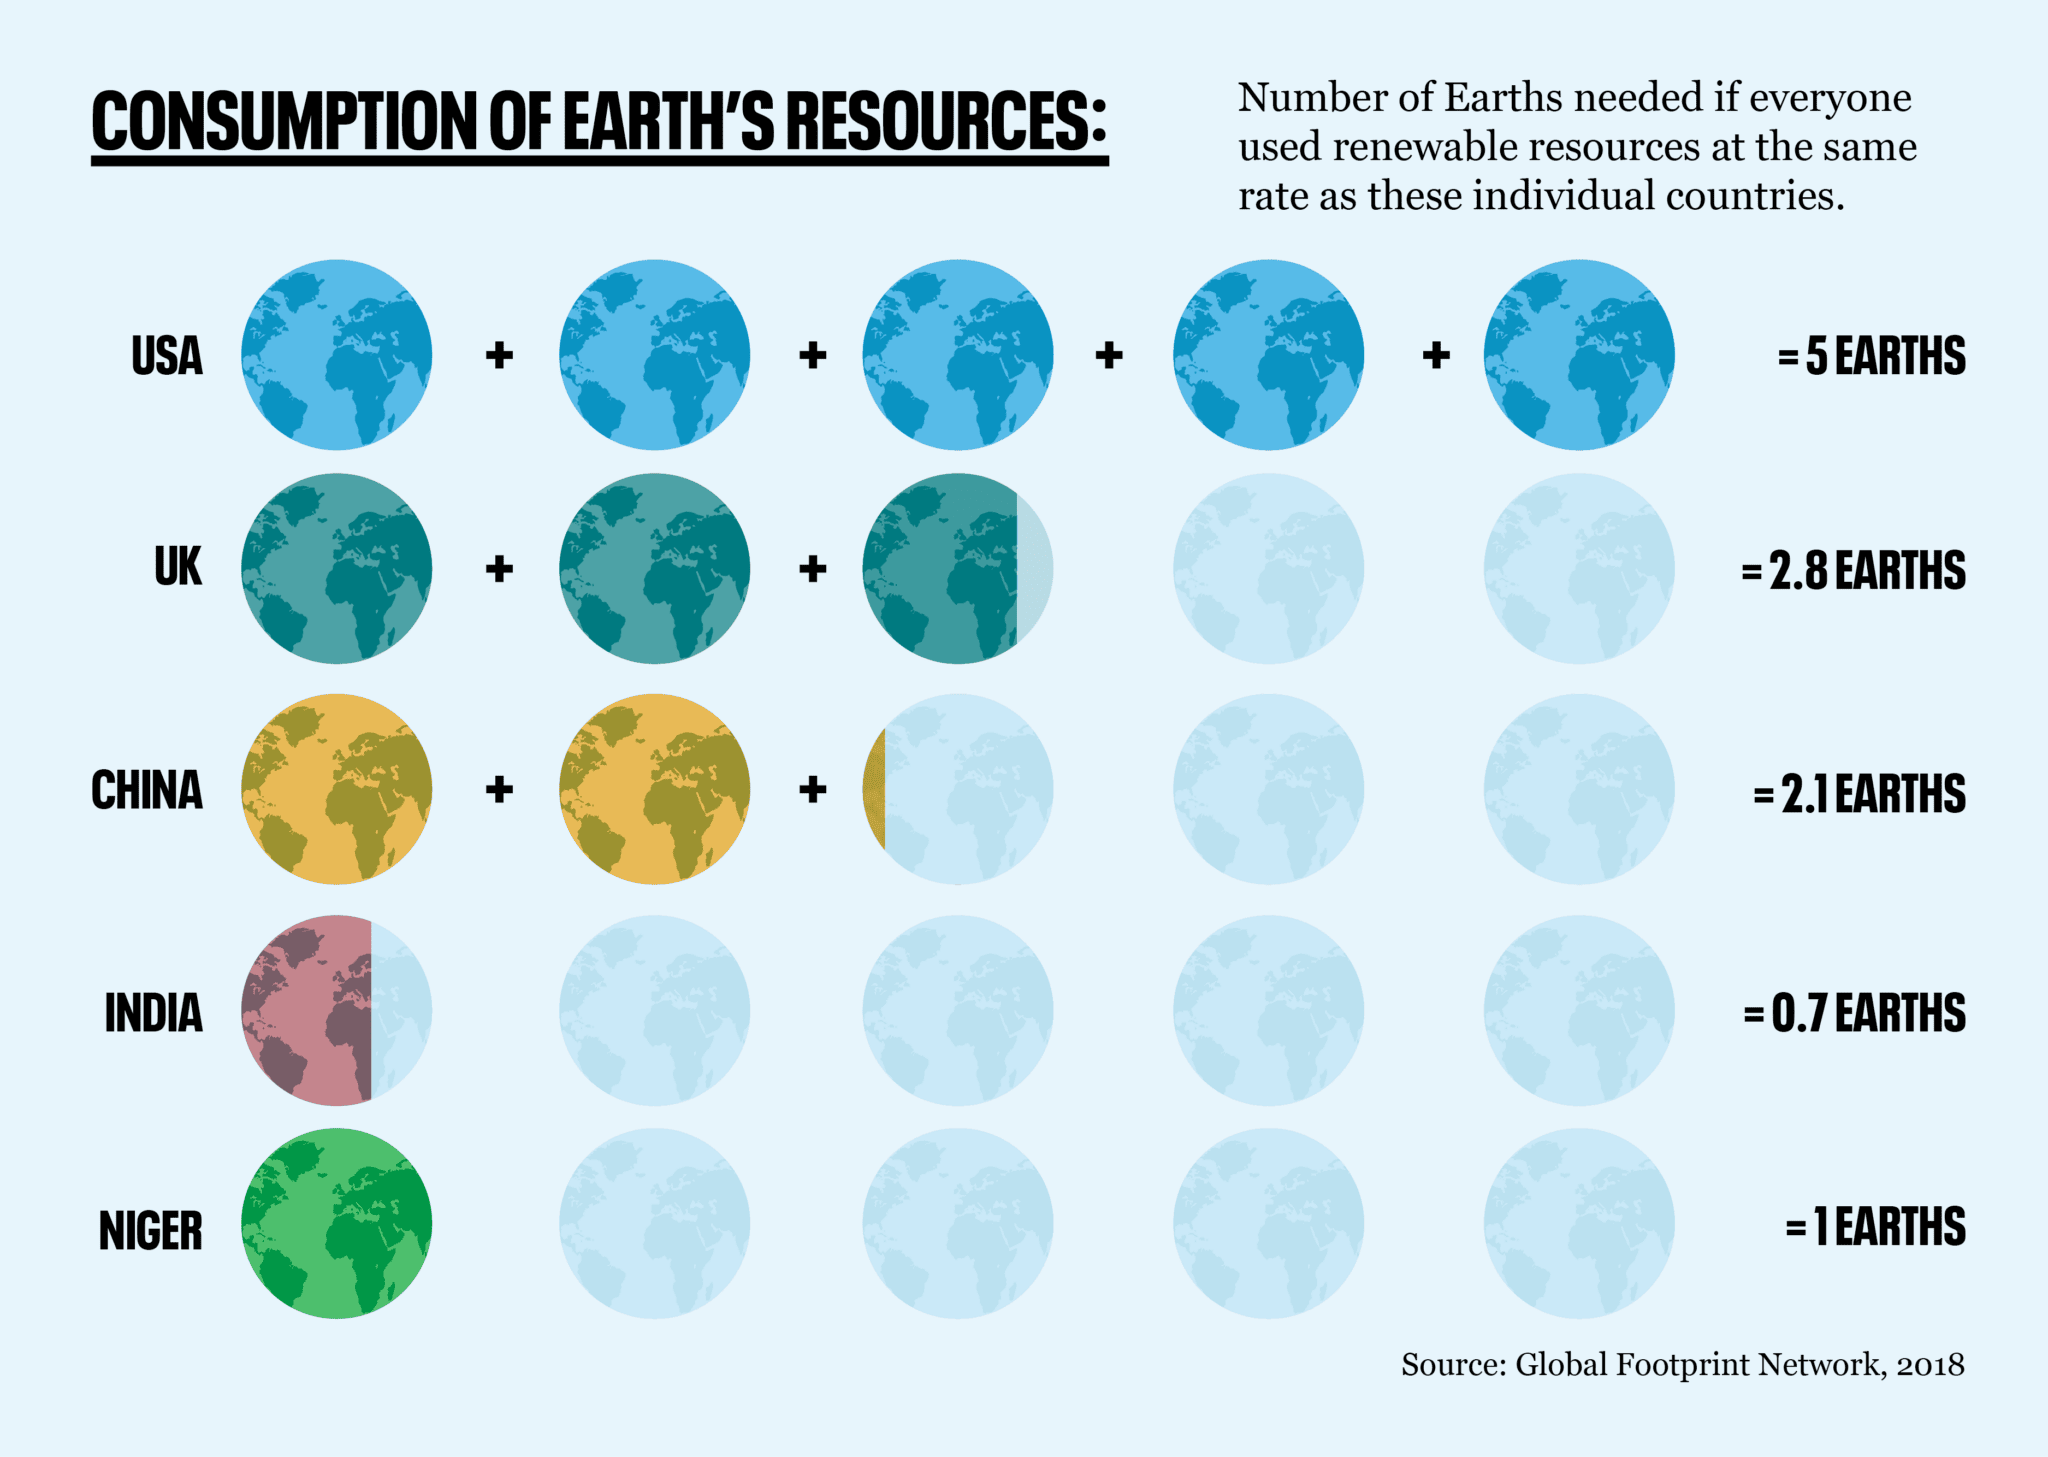 The estimated number of Earths needed to support various lifestyles around the world.